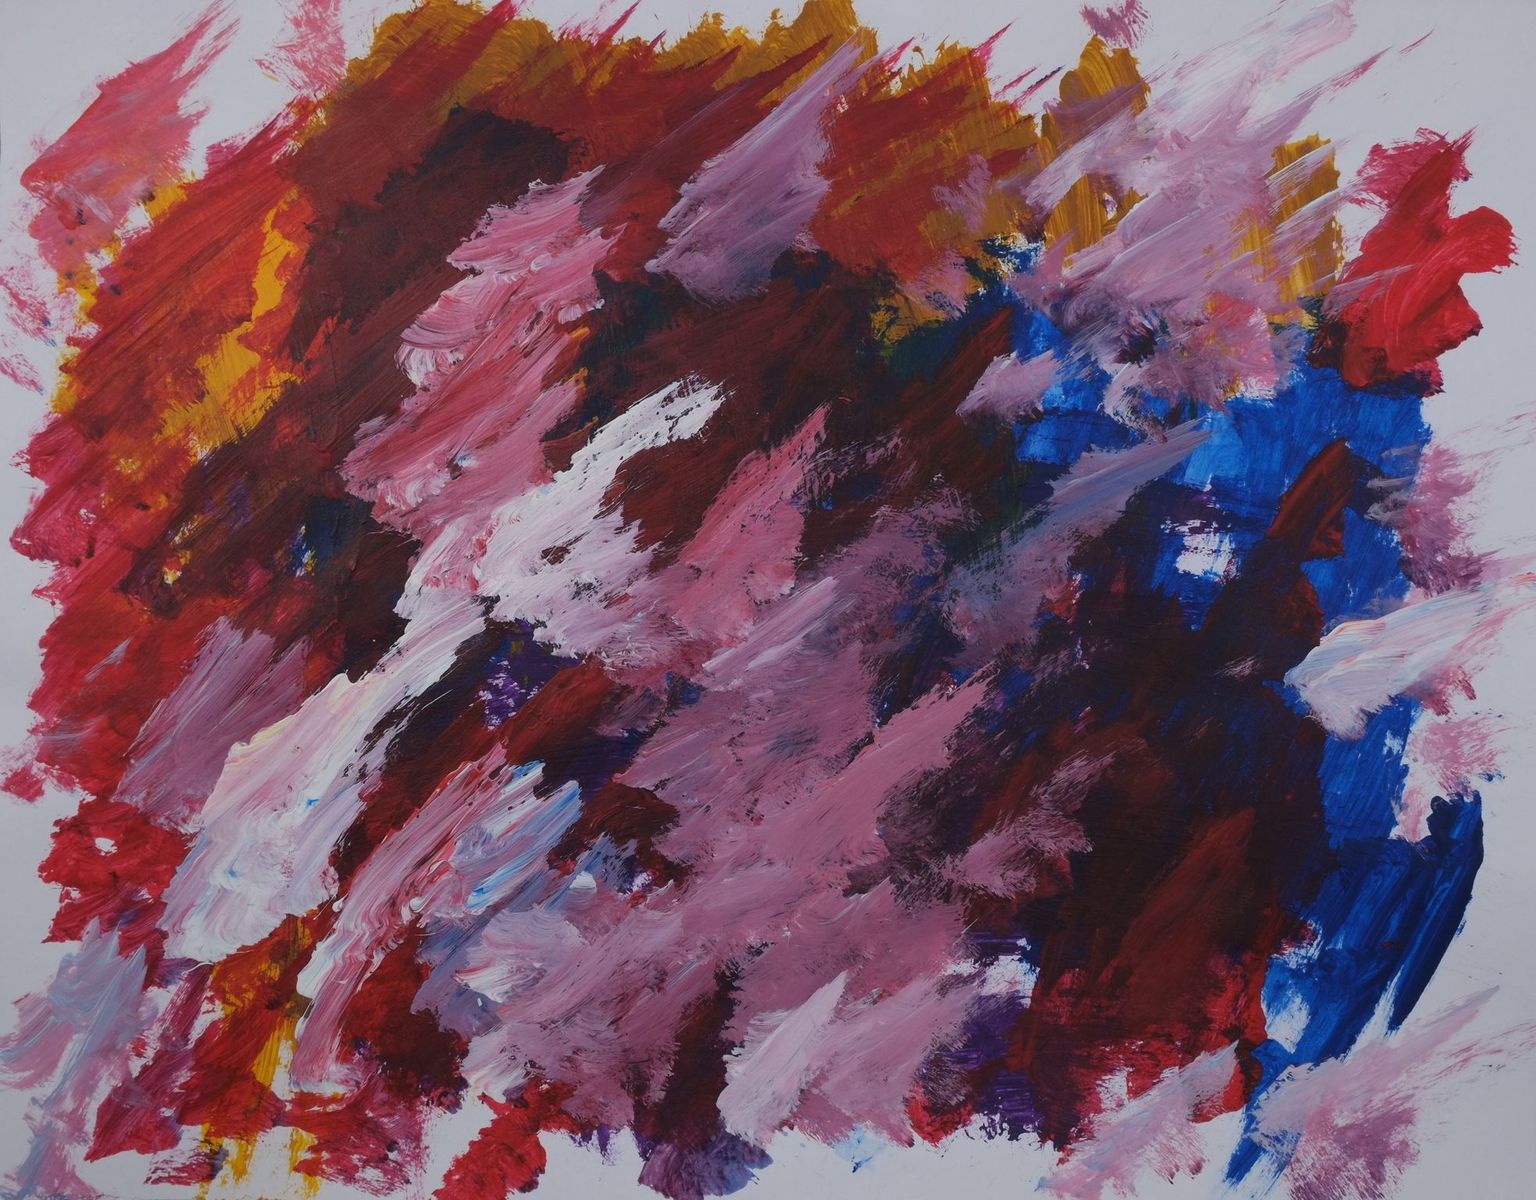 Acrylic on paper artwork with white background and close knit paint streaks of red, yellow, maroon, white and blue